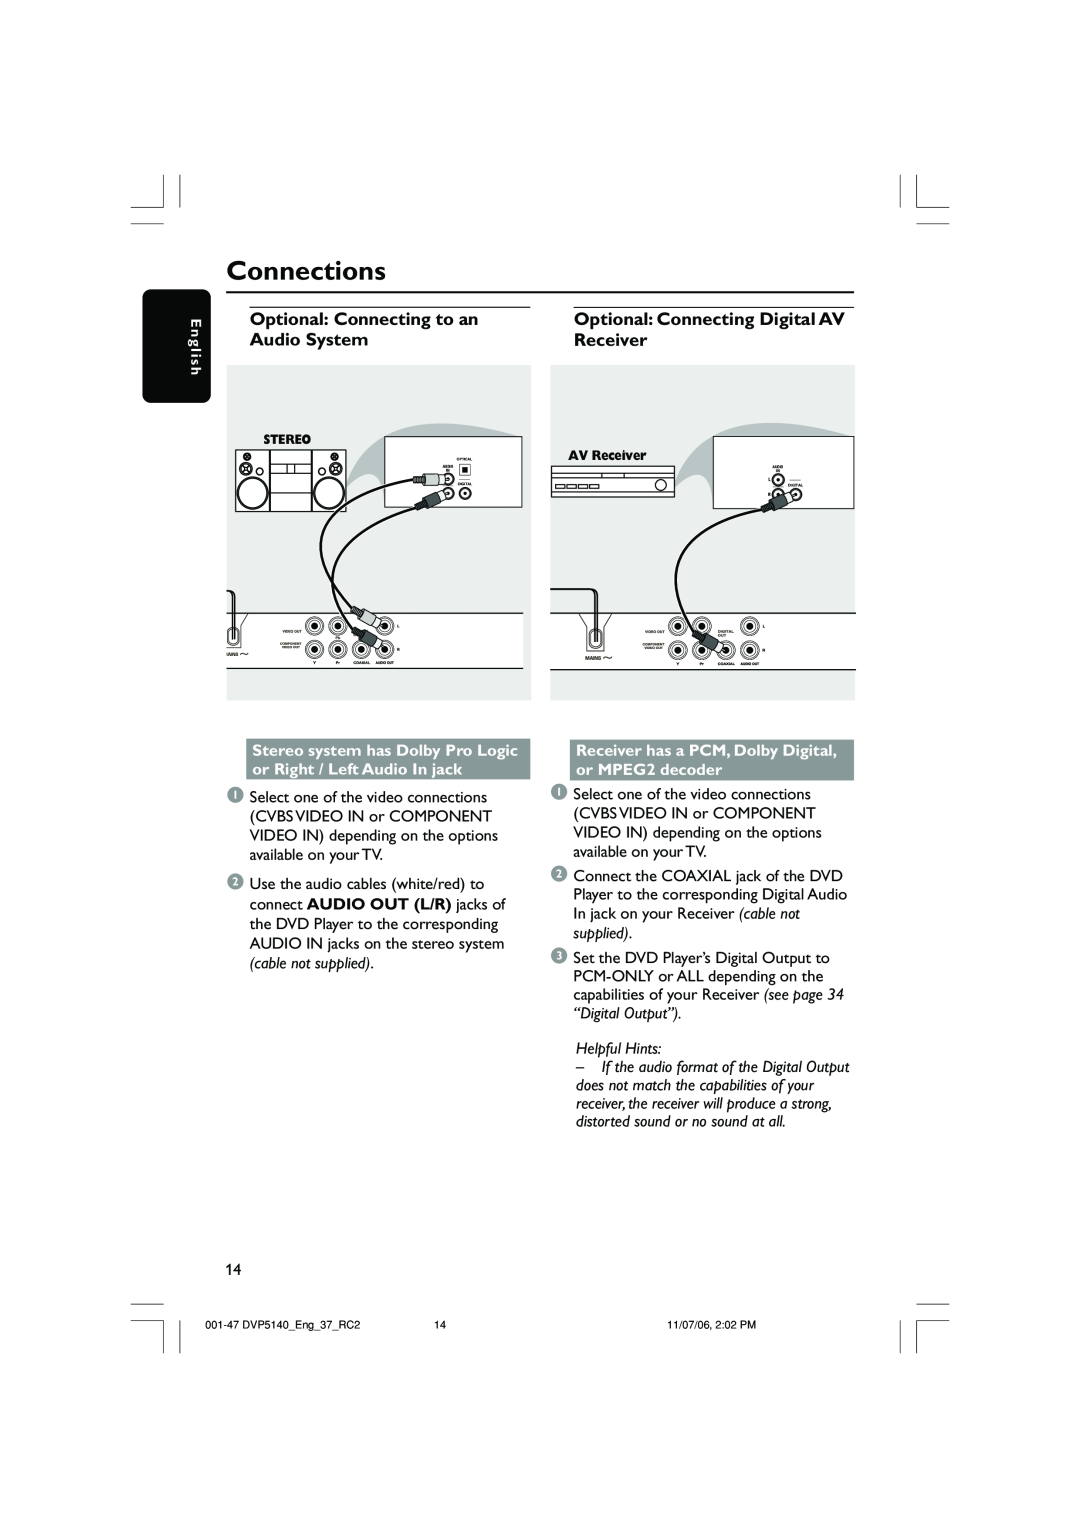 Philips DVP5140 user manual Optional Connecting to an Audio System, Optional Connecting Digital AV Receiver, Connections 